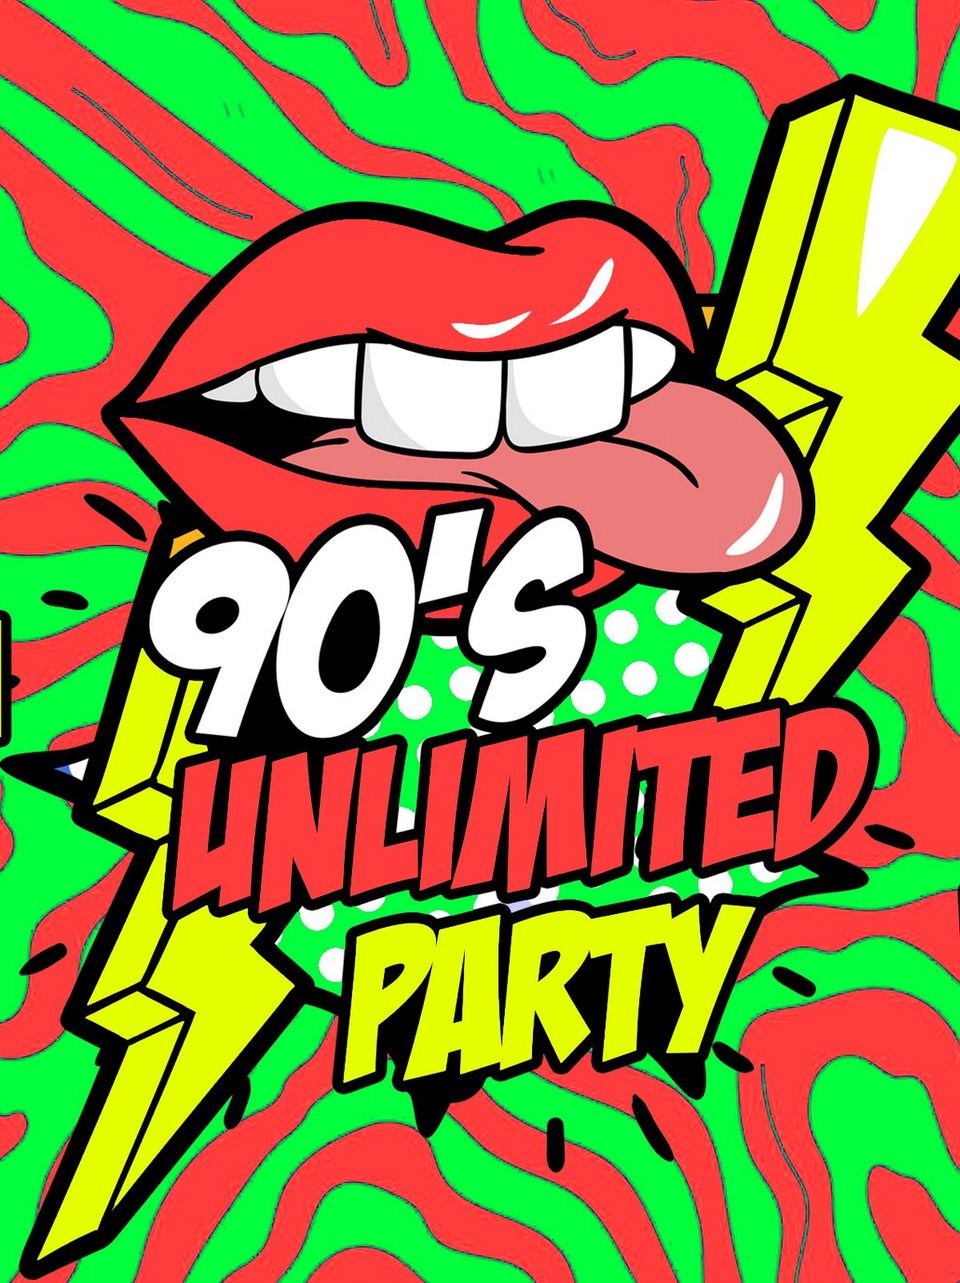 90s UNLIMITED PARTY MIT SNAP live on stage